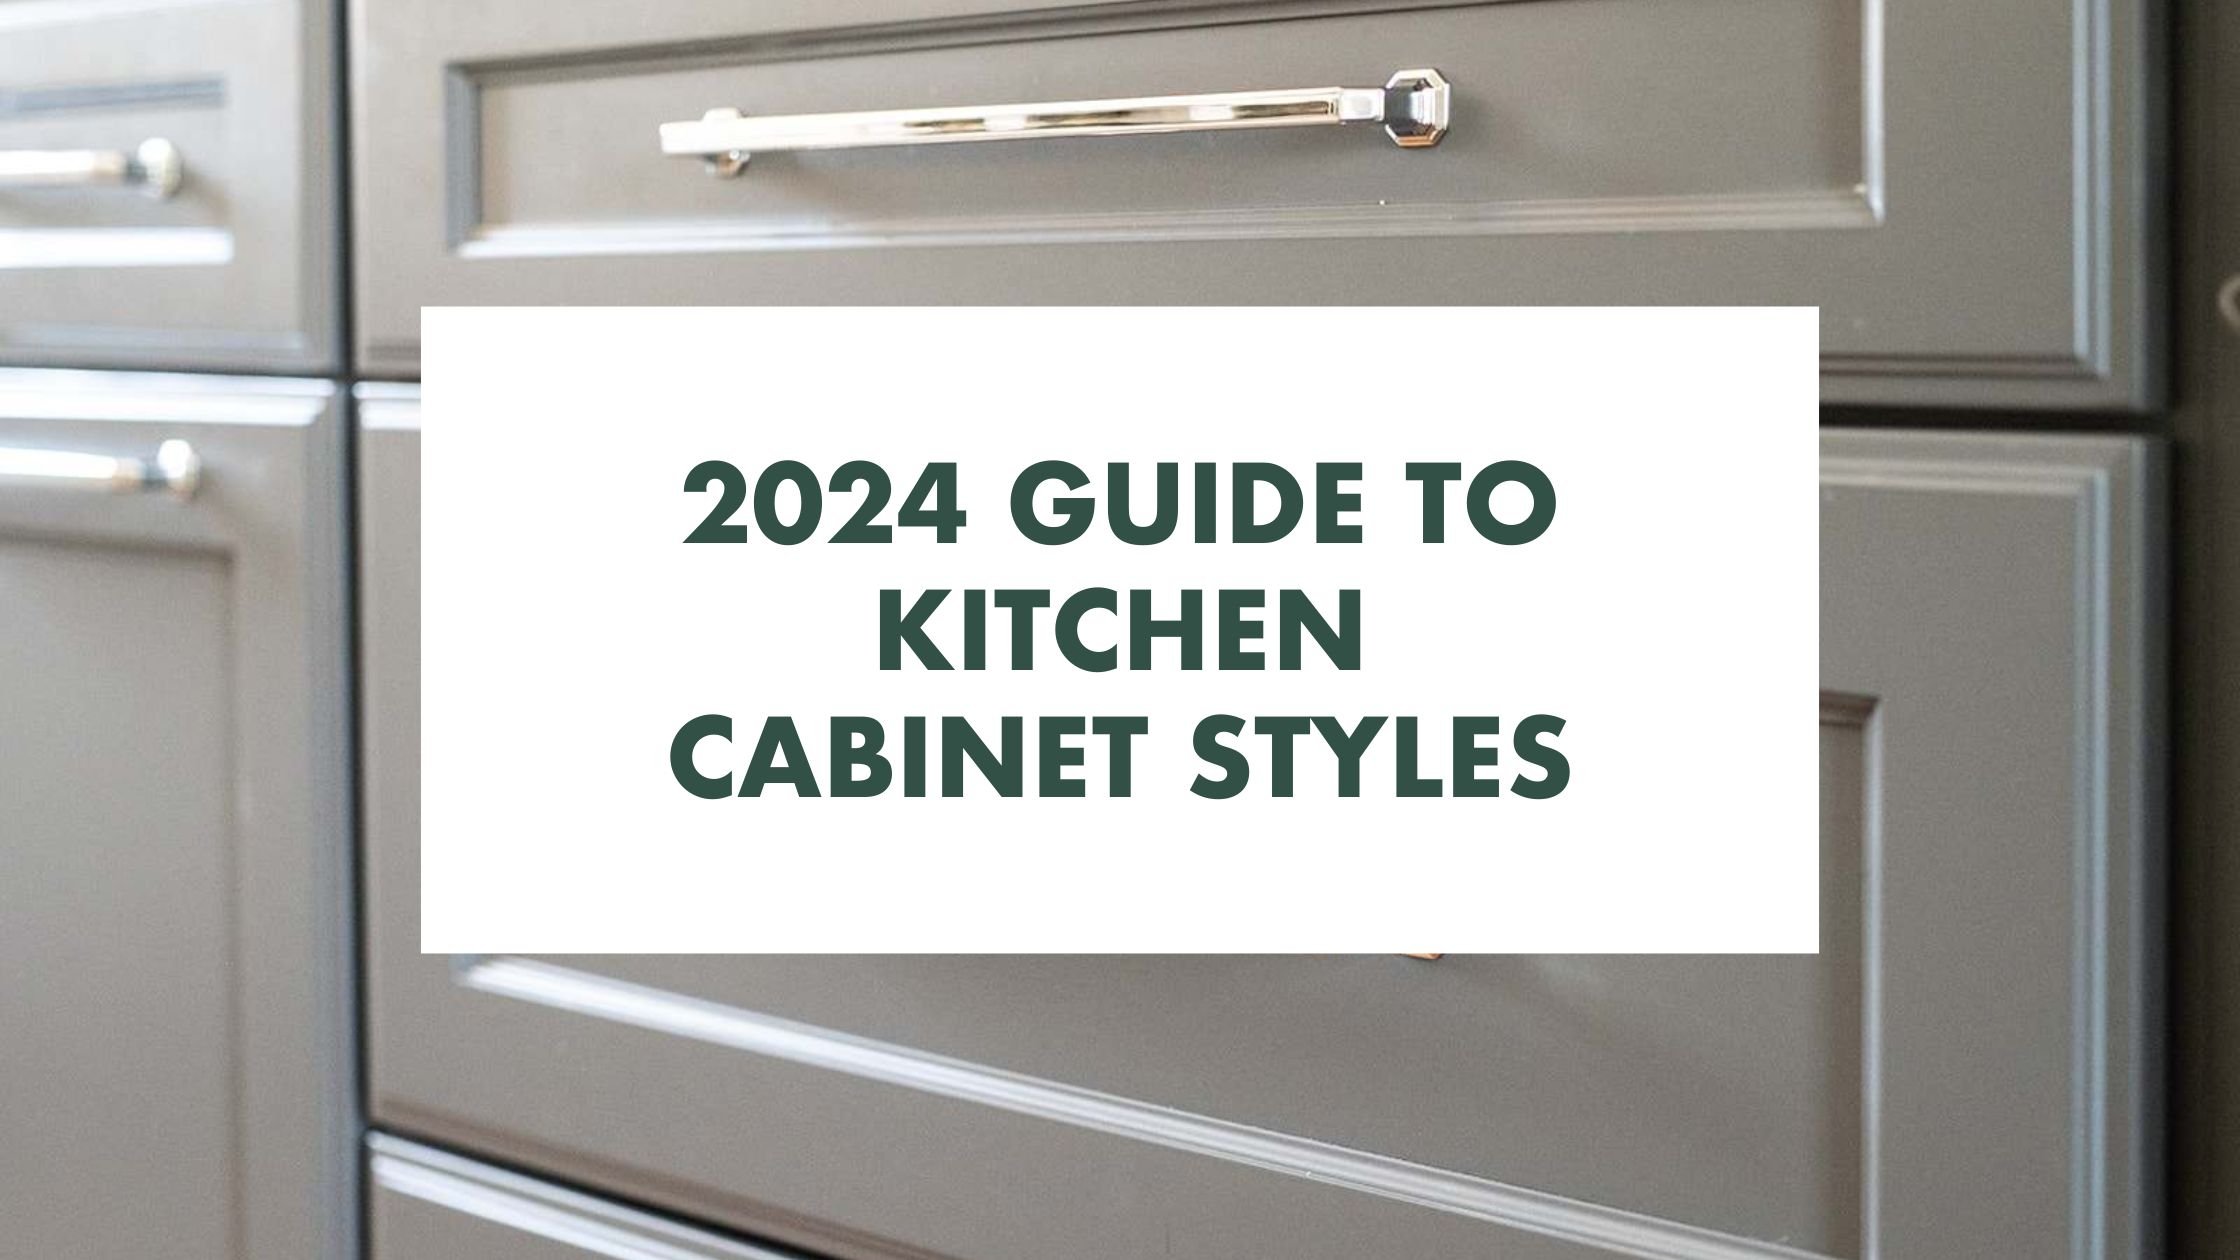 2024 Guide to Kitchen Cabinet Styles